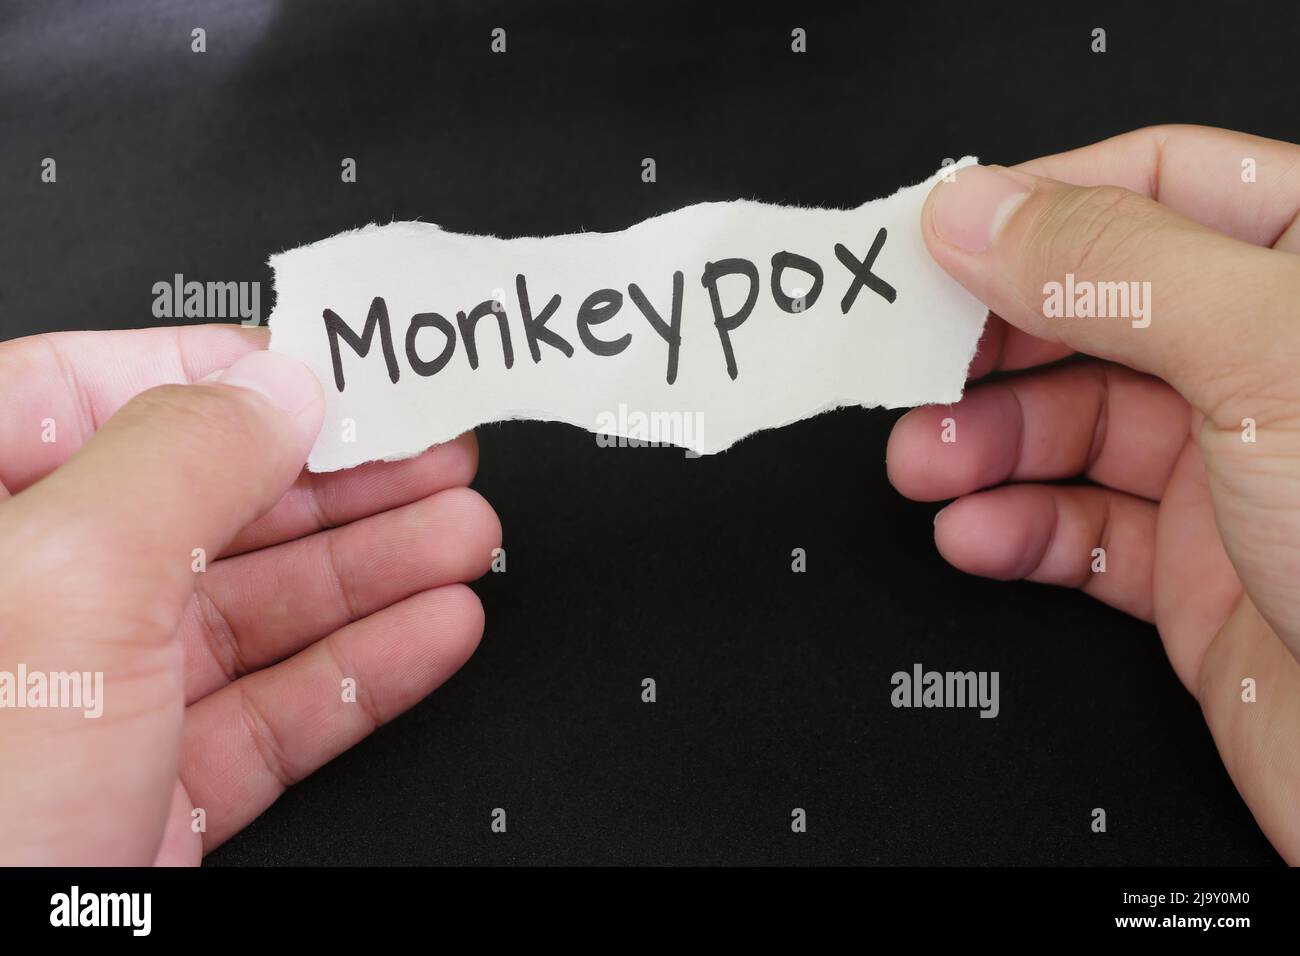 Monkeypox virus disease concept. Hand holding paper with word monkeypox in black background. Stock Photo